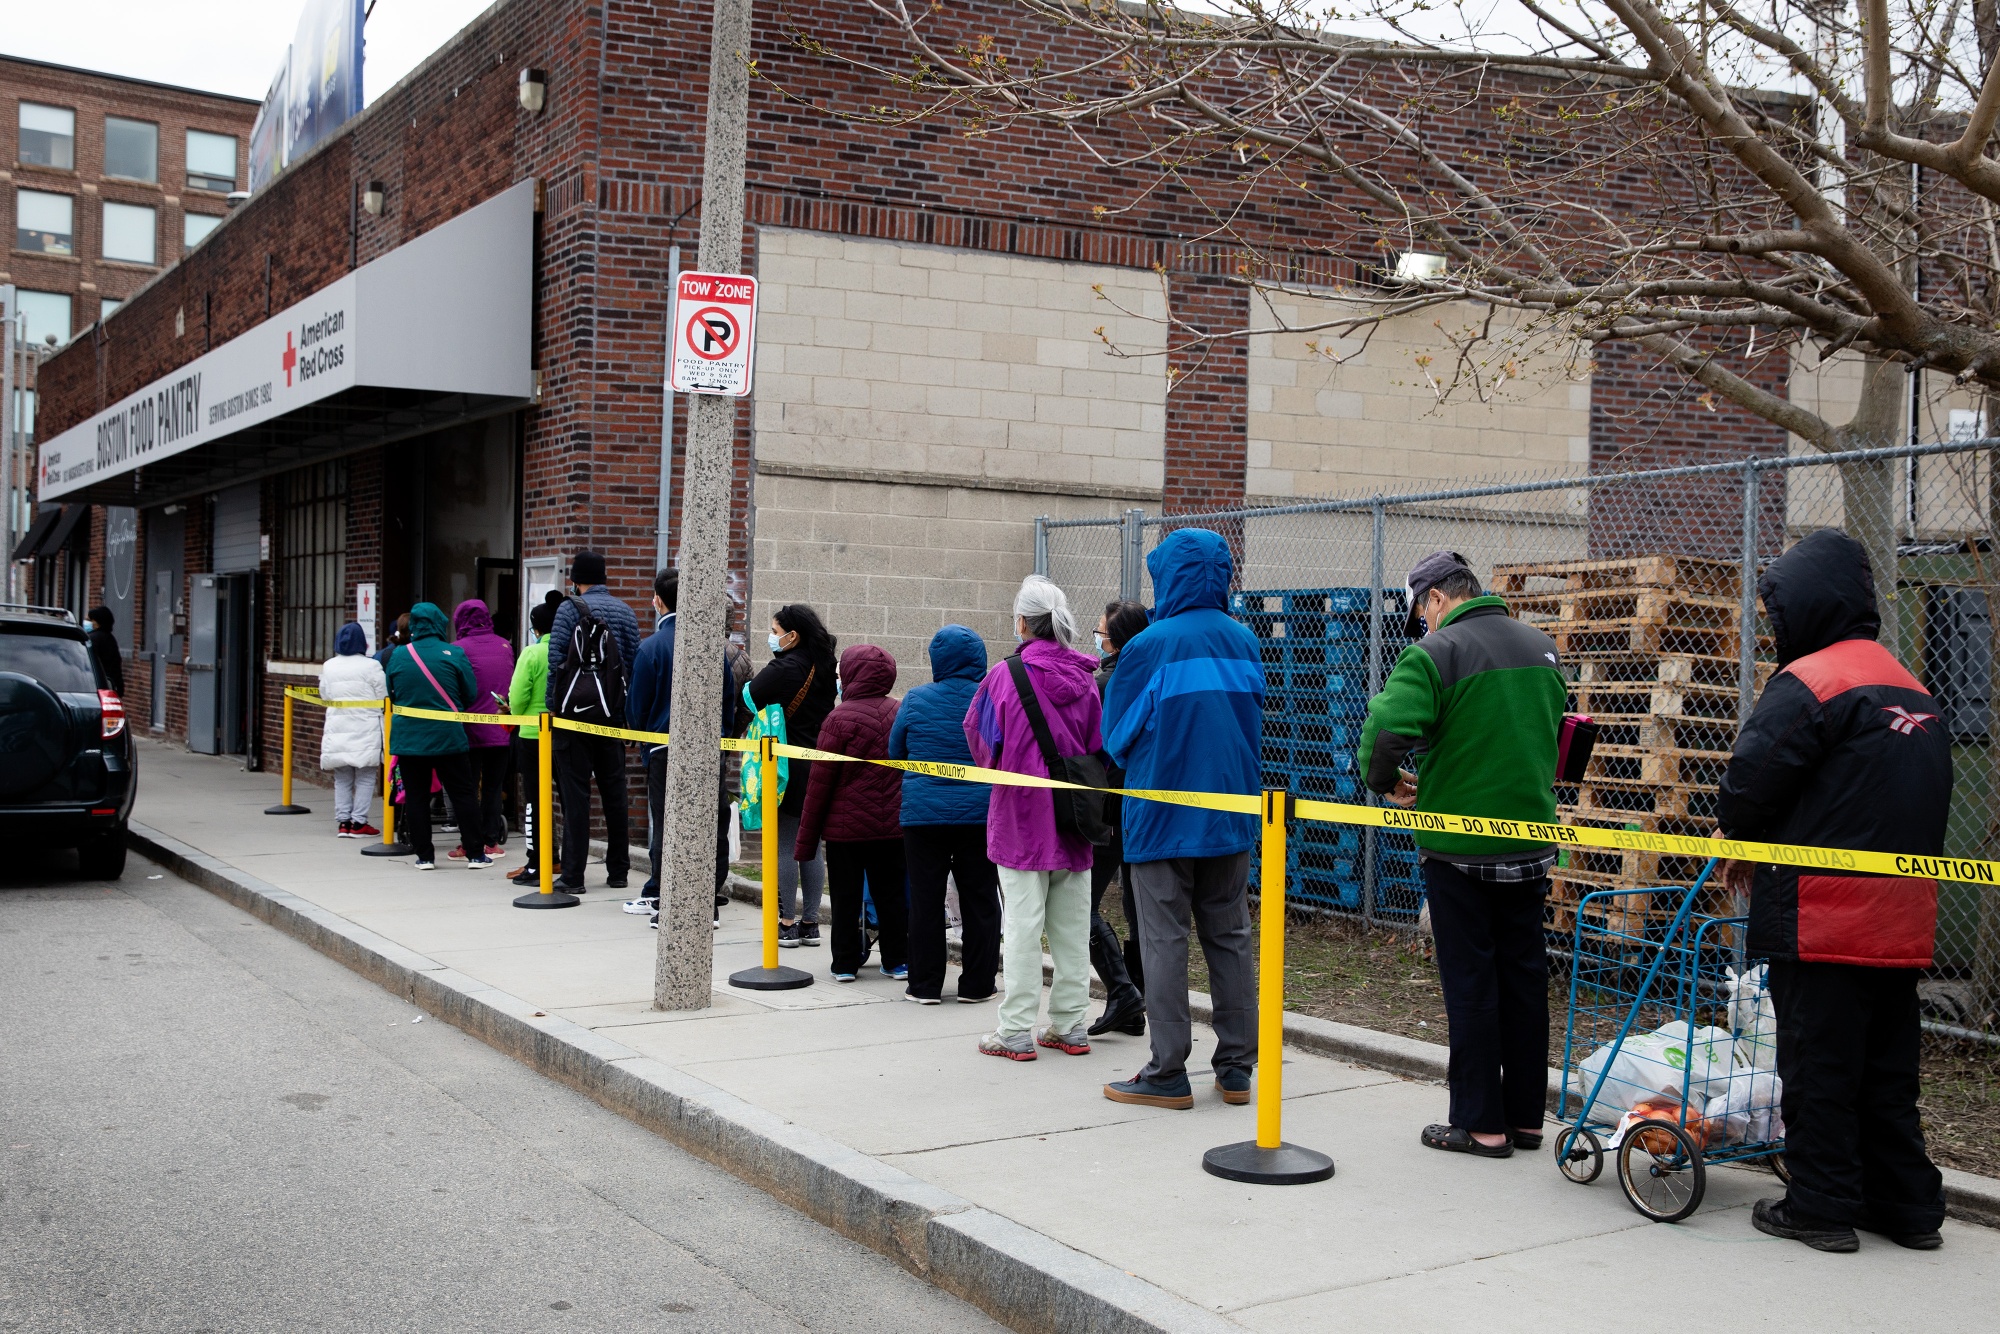 The number of people filing into Boston’s American Red Cross Food Pantry on some days now exceeds the worst periods of the pandemic economic crisis.